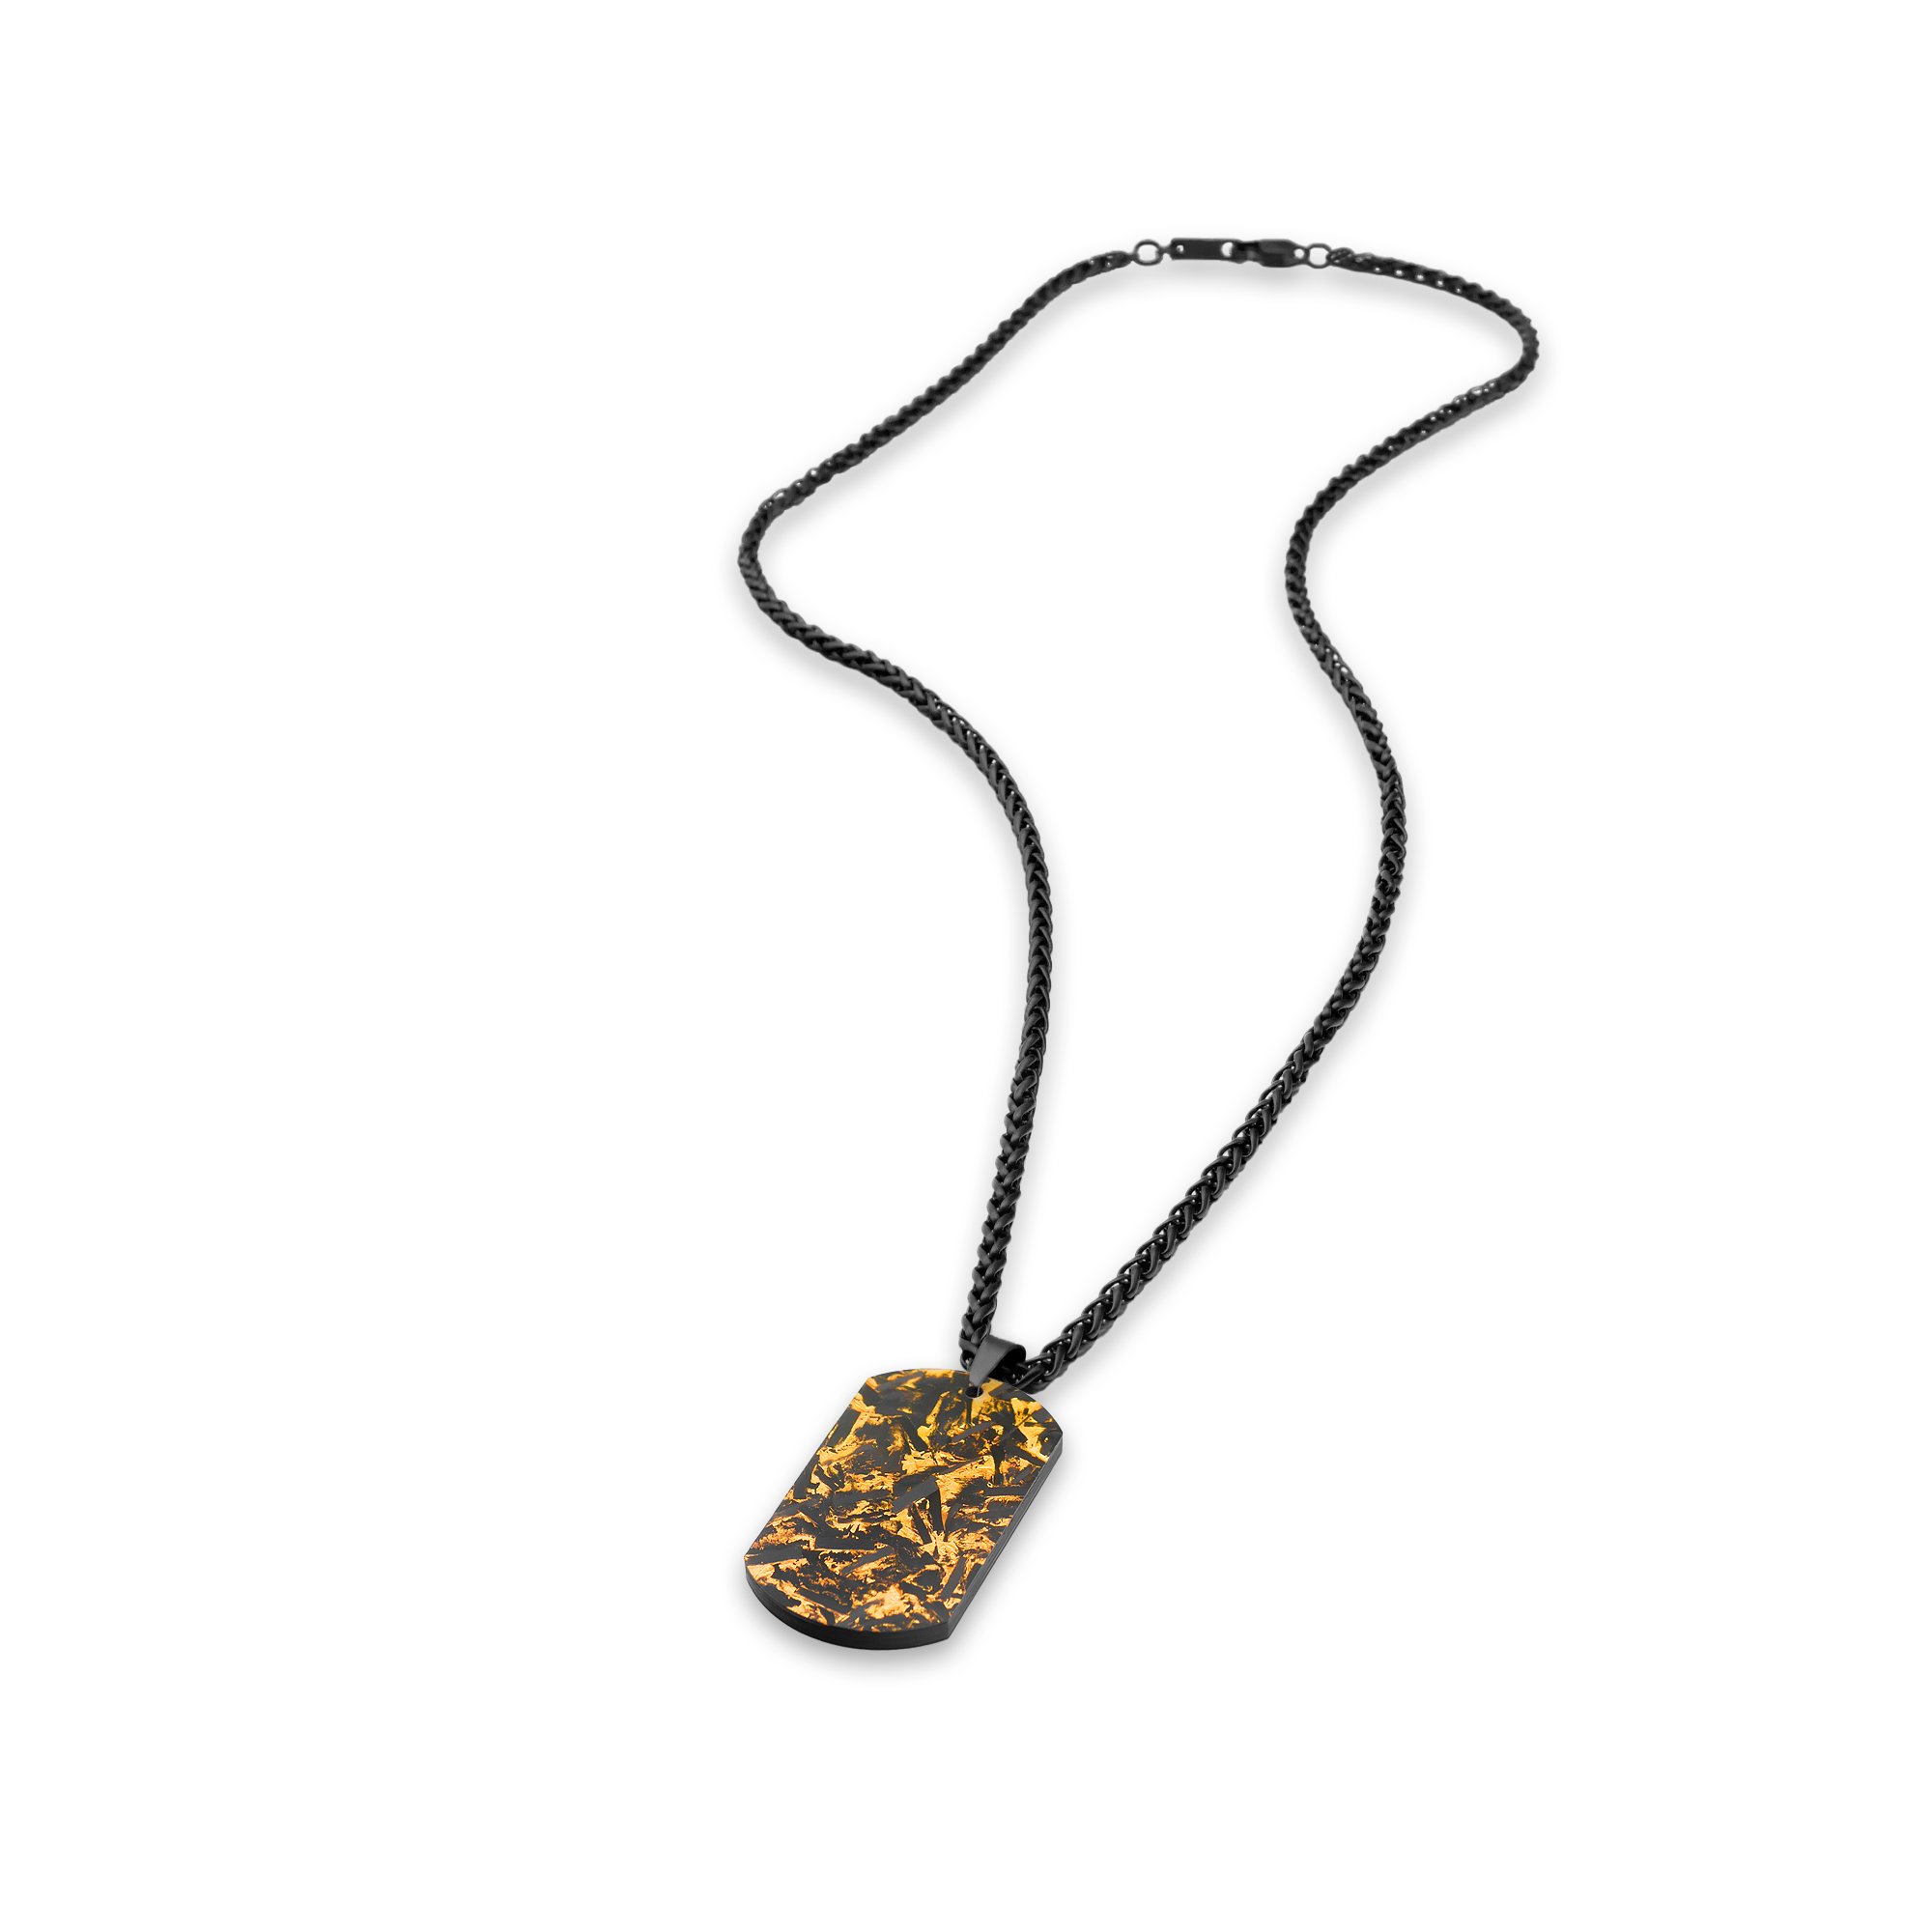 GOLD DOGTAG - KEEL CHAIN